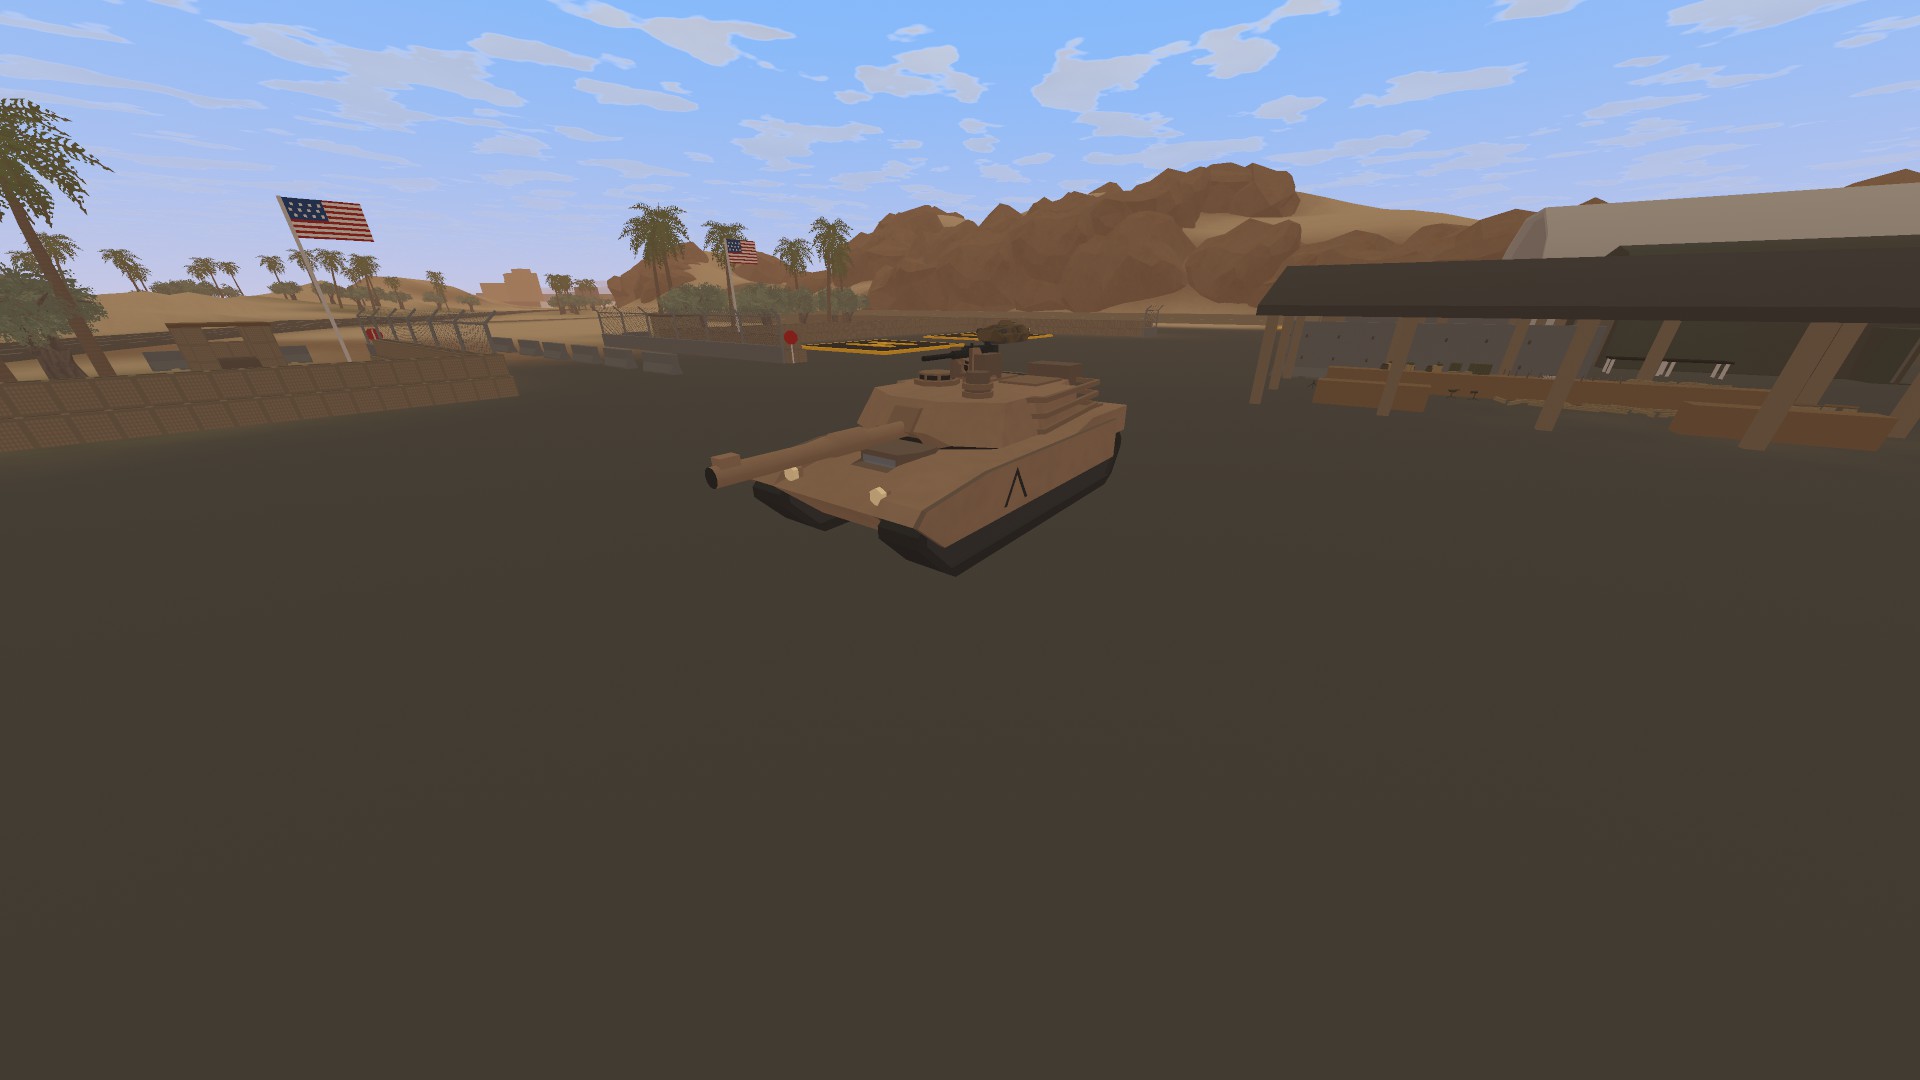 Unturned ID's for vehicles and ammo - USA Vehicles: - F31C2B4